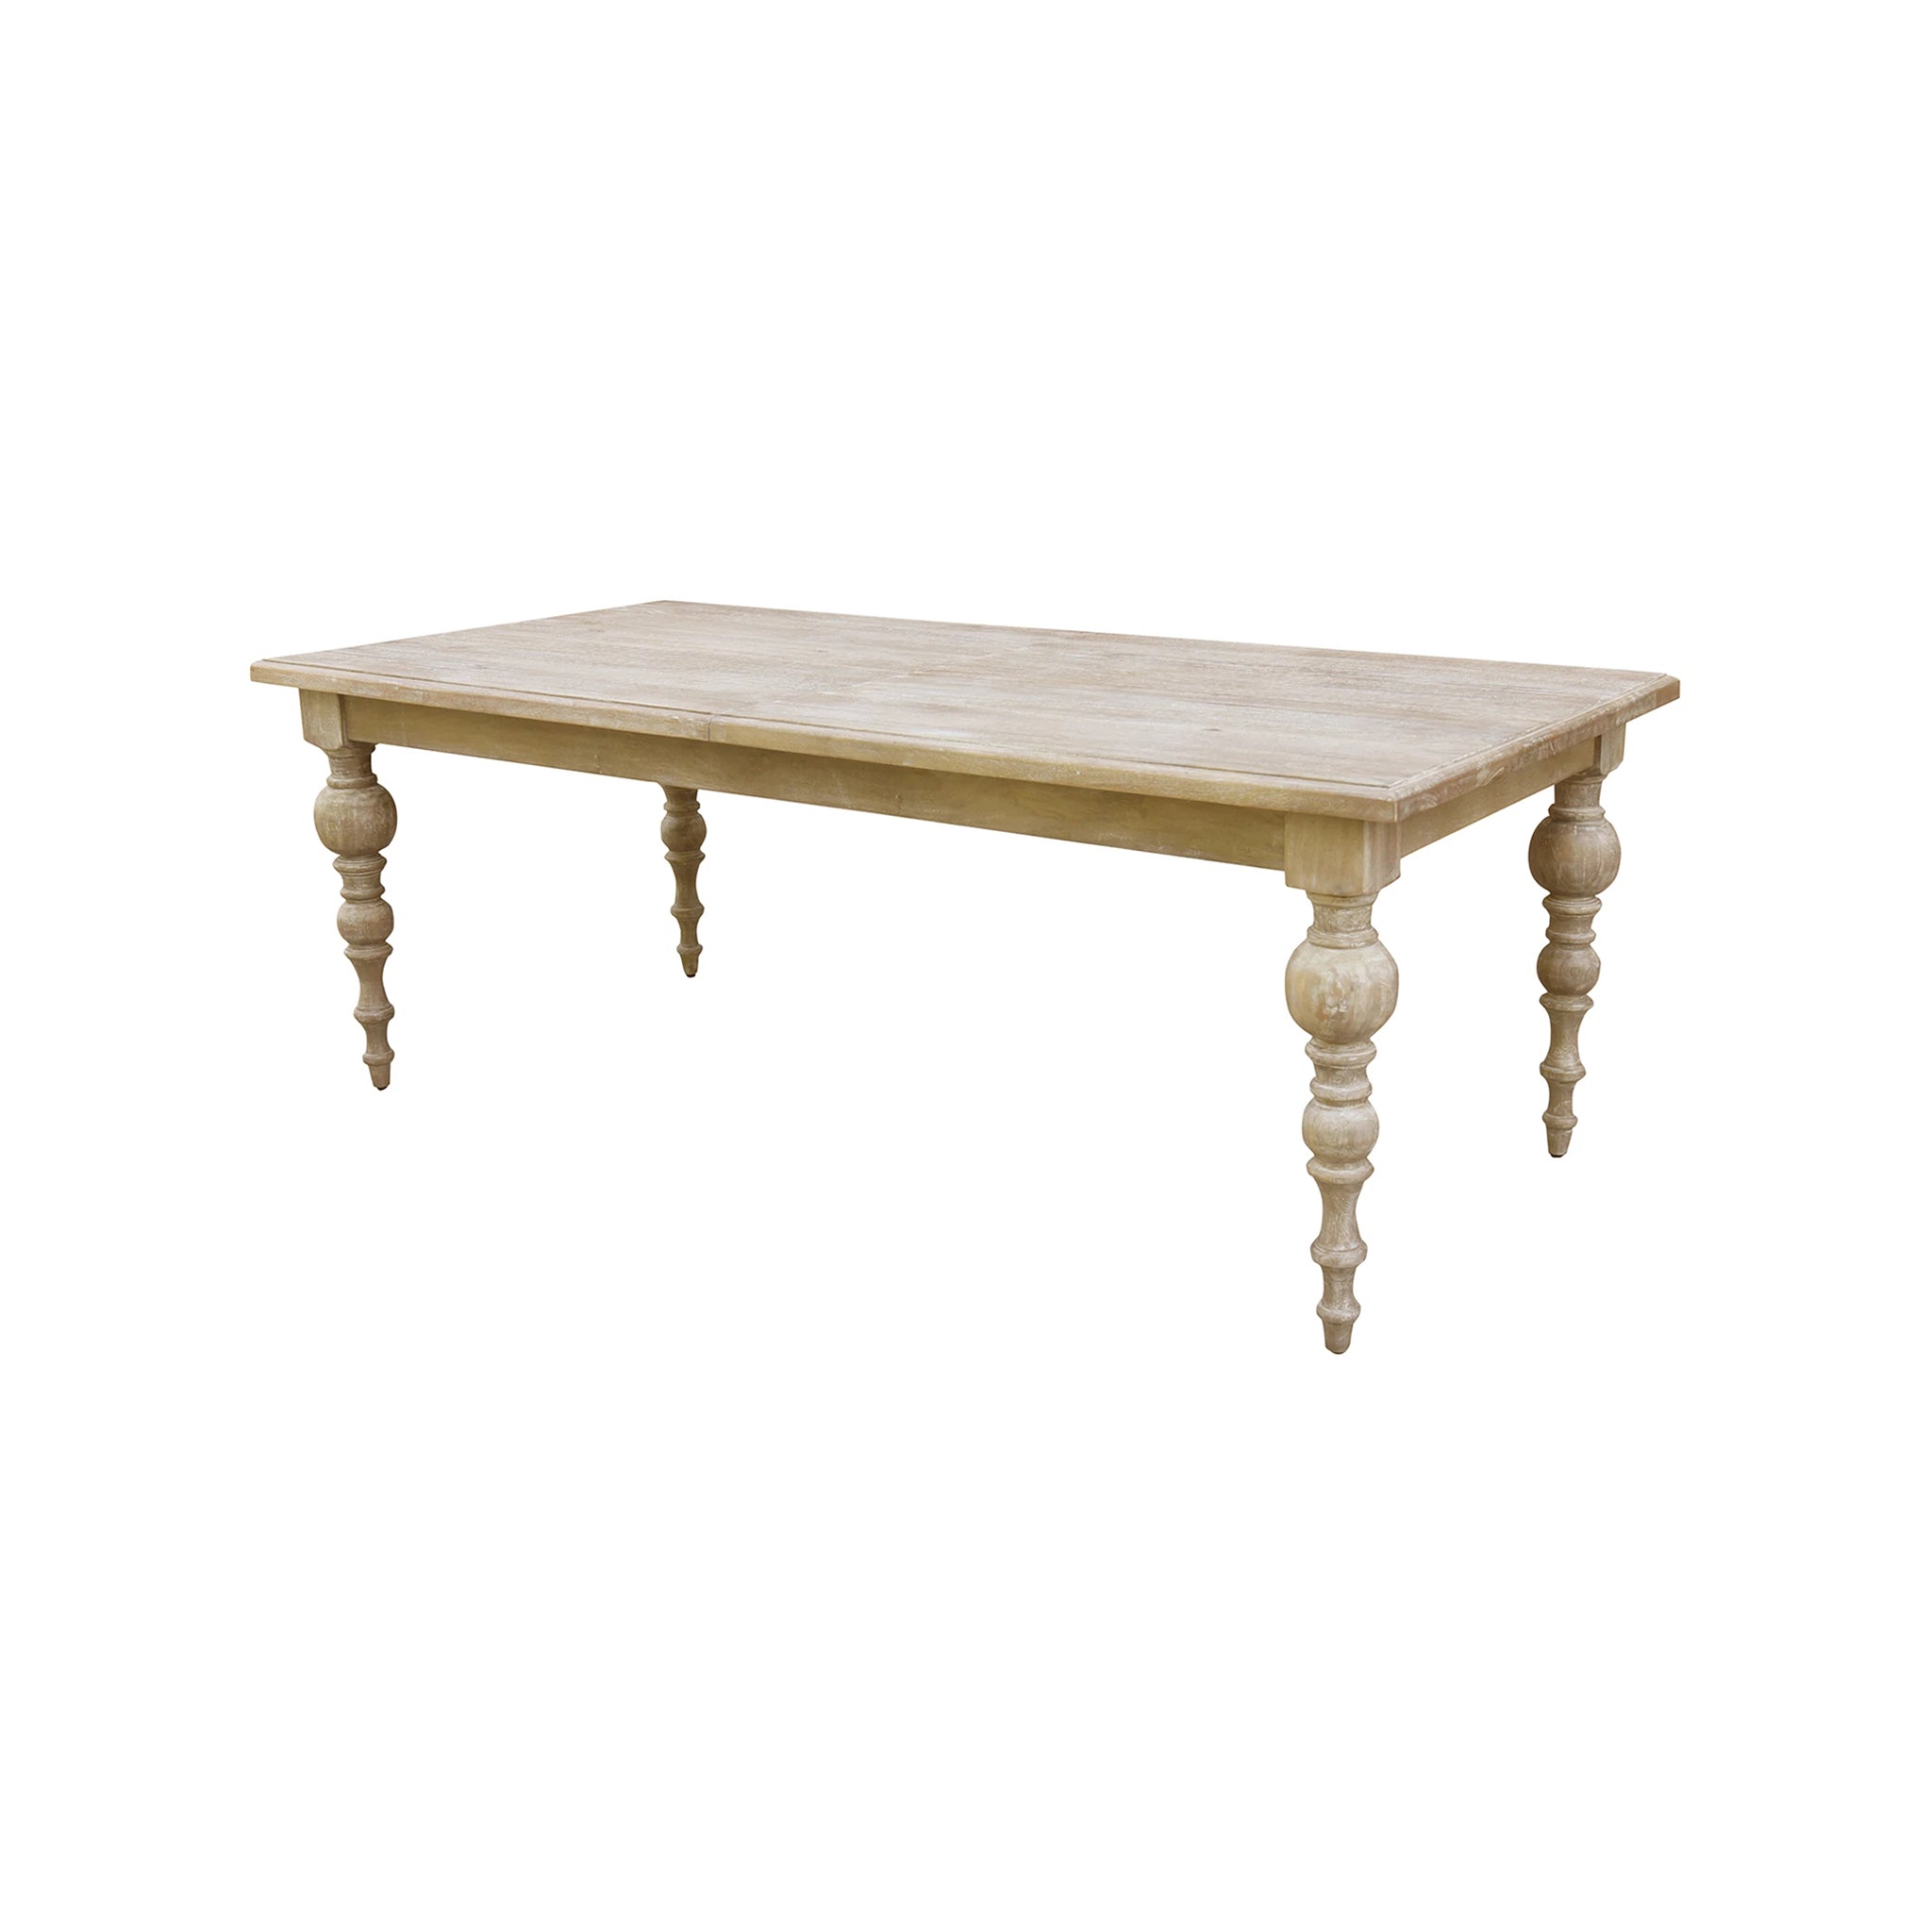 Side view of Greensboro Dining Table from Wisteria, showcasing its elegant design and craftsmanship